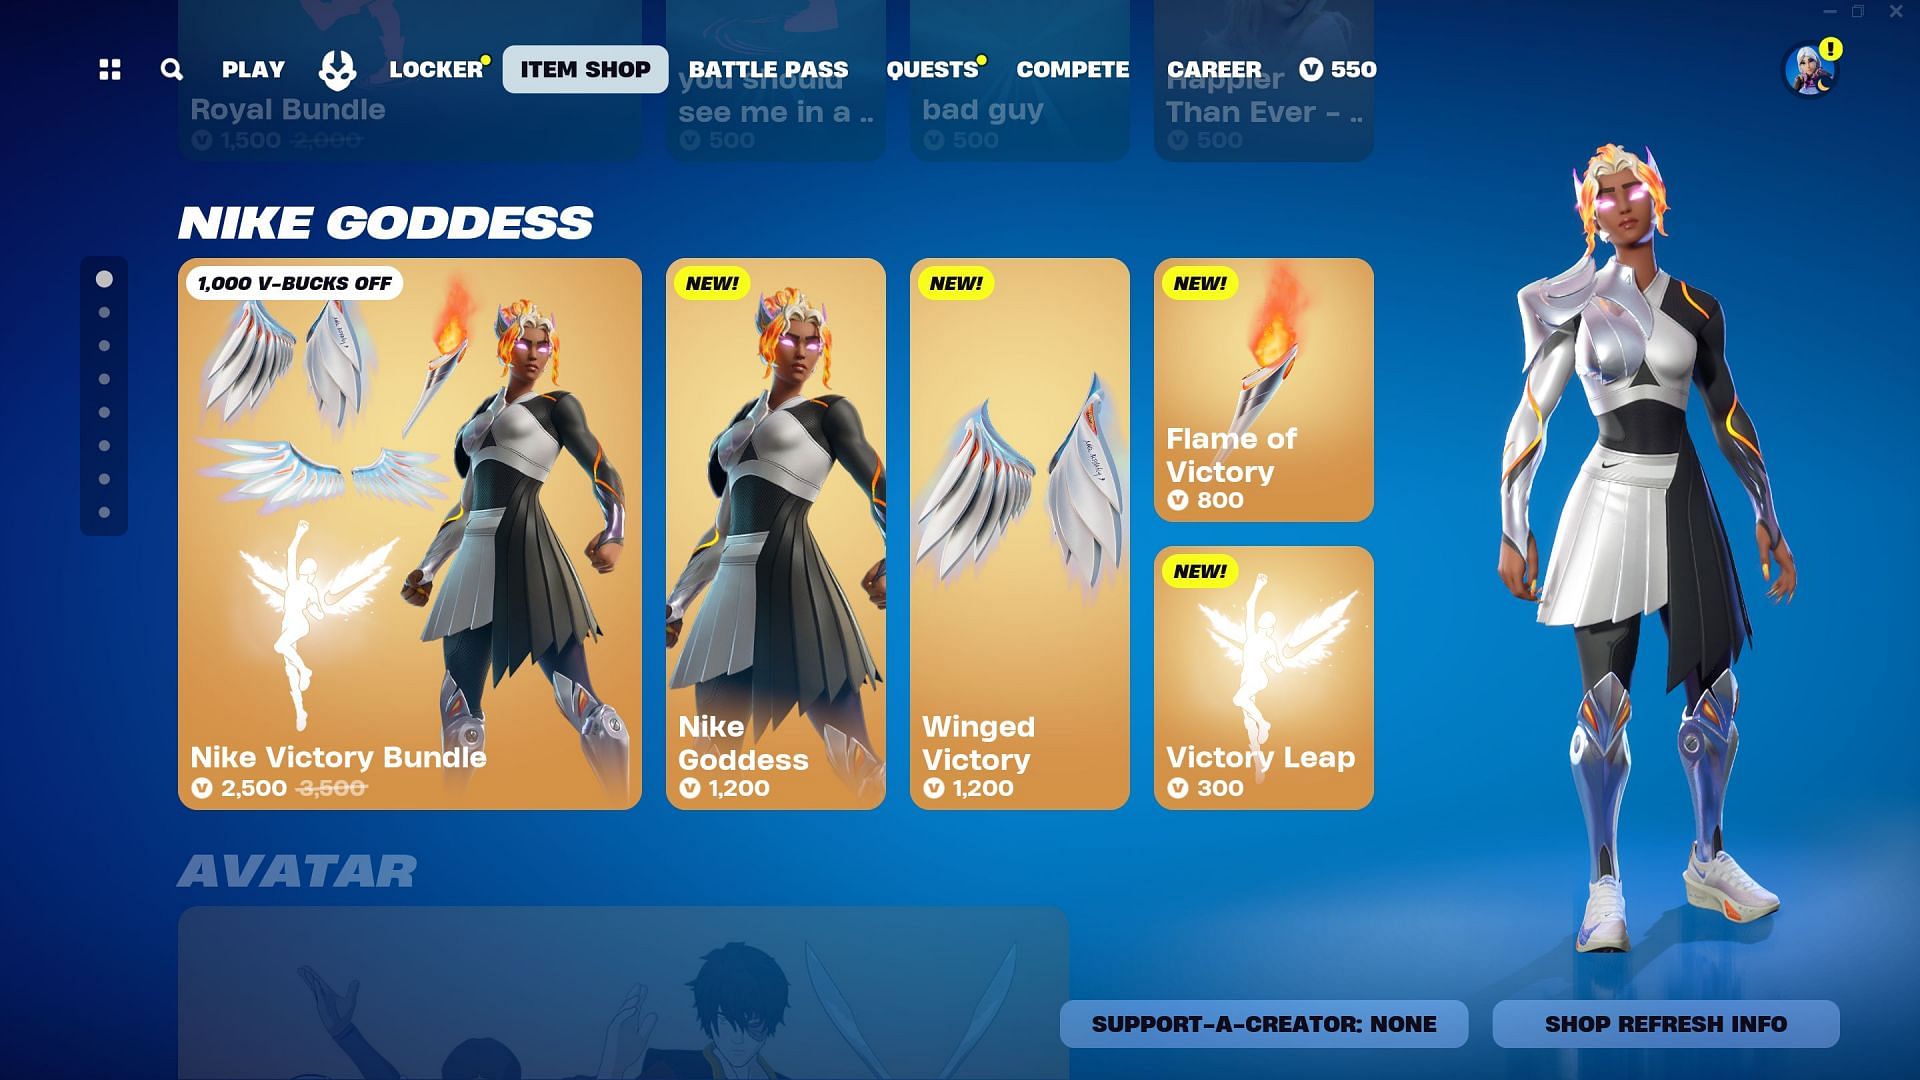 Nike Goddess is currently listed in the Item Shop (Image via Epic Games/Fortnite)